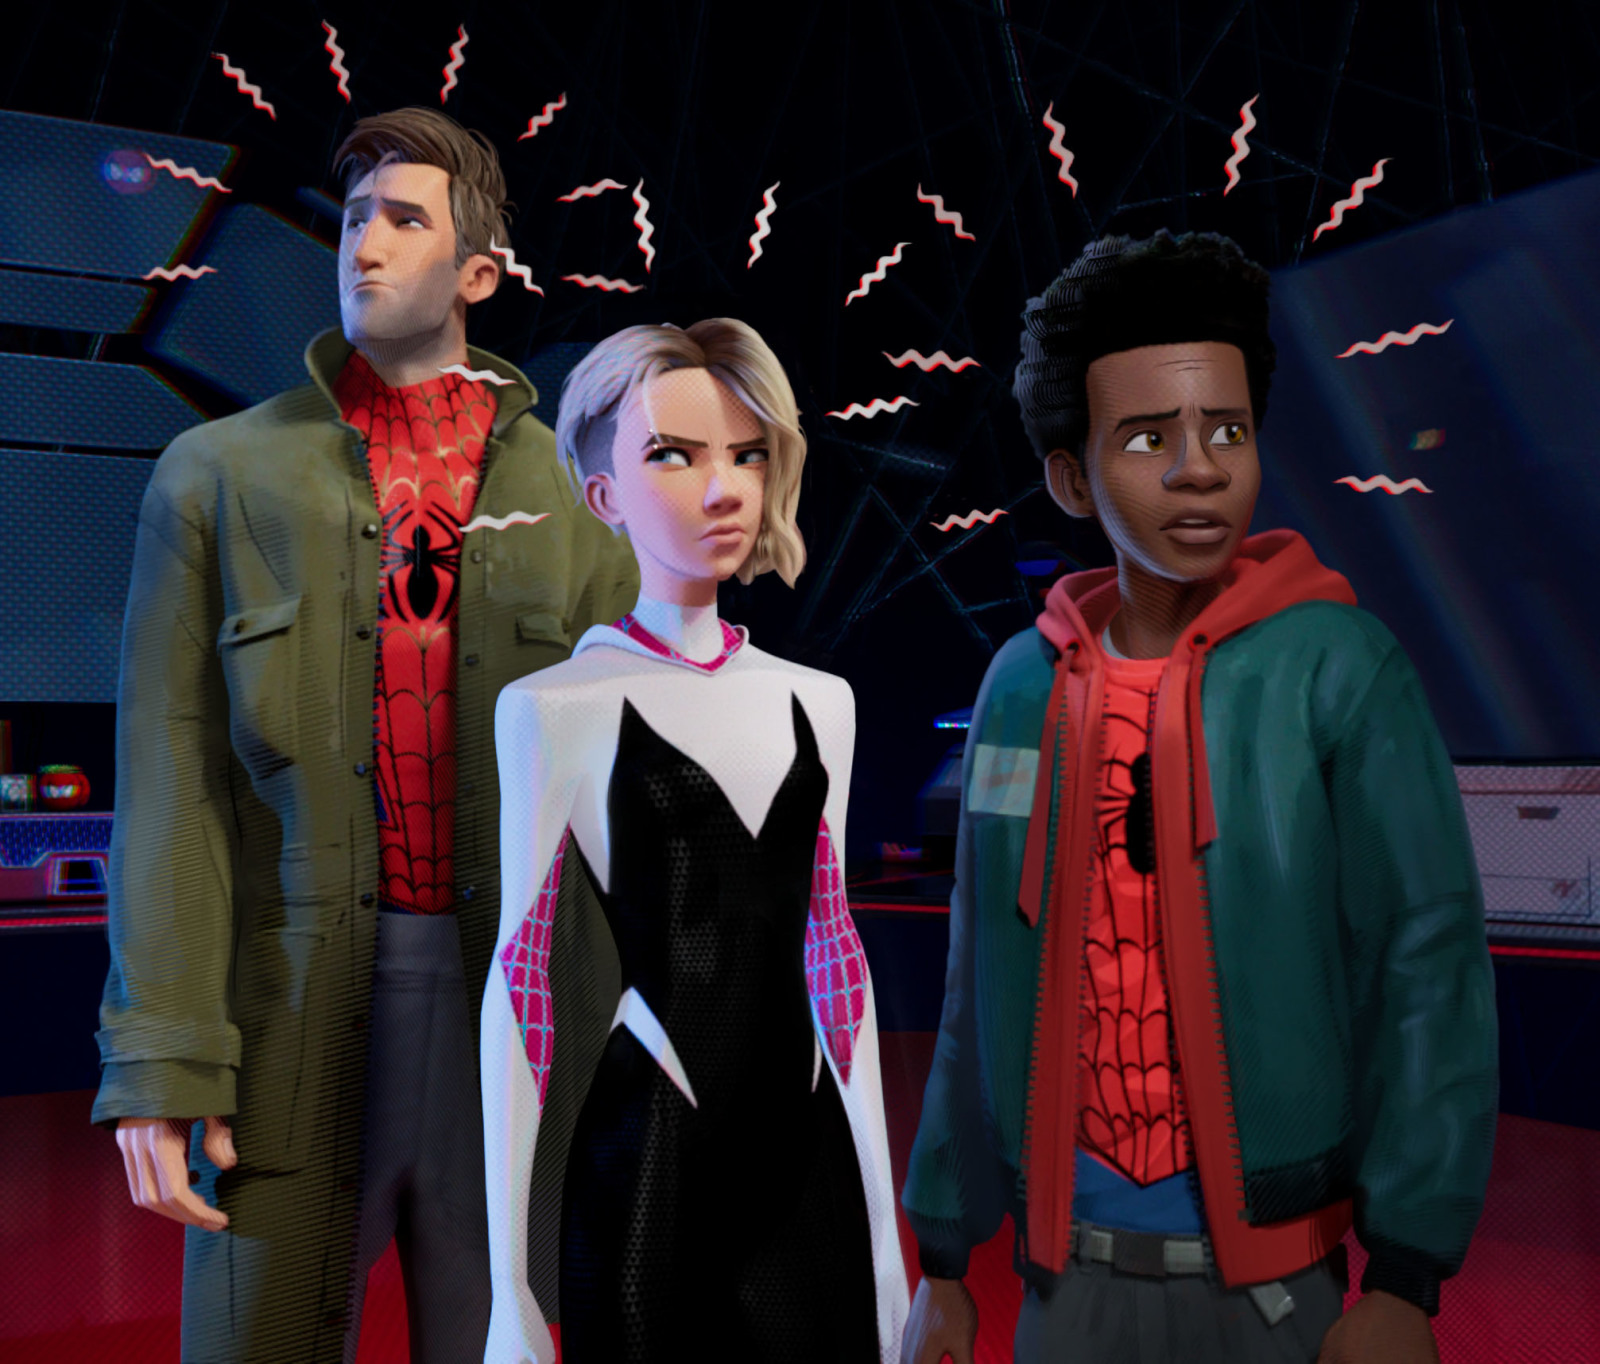 Is Spider-Man: Into the Spider-Verse on Netflix? - TV Guide